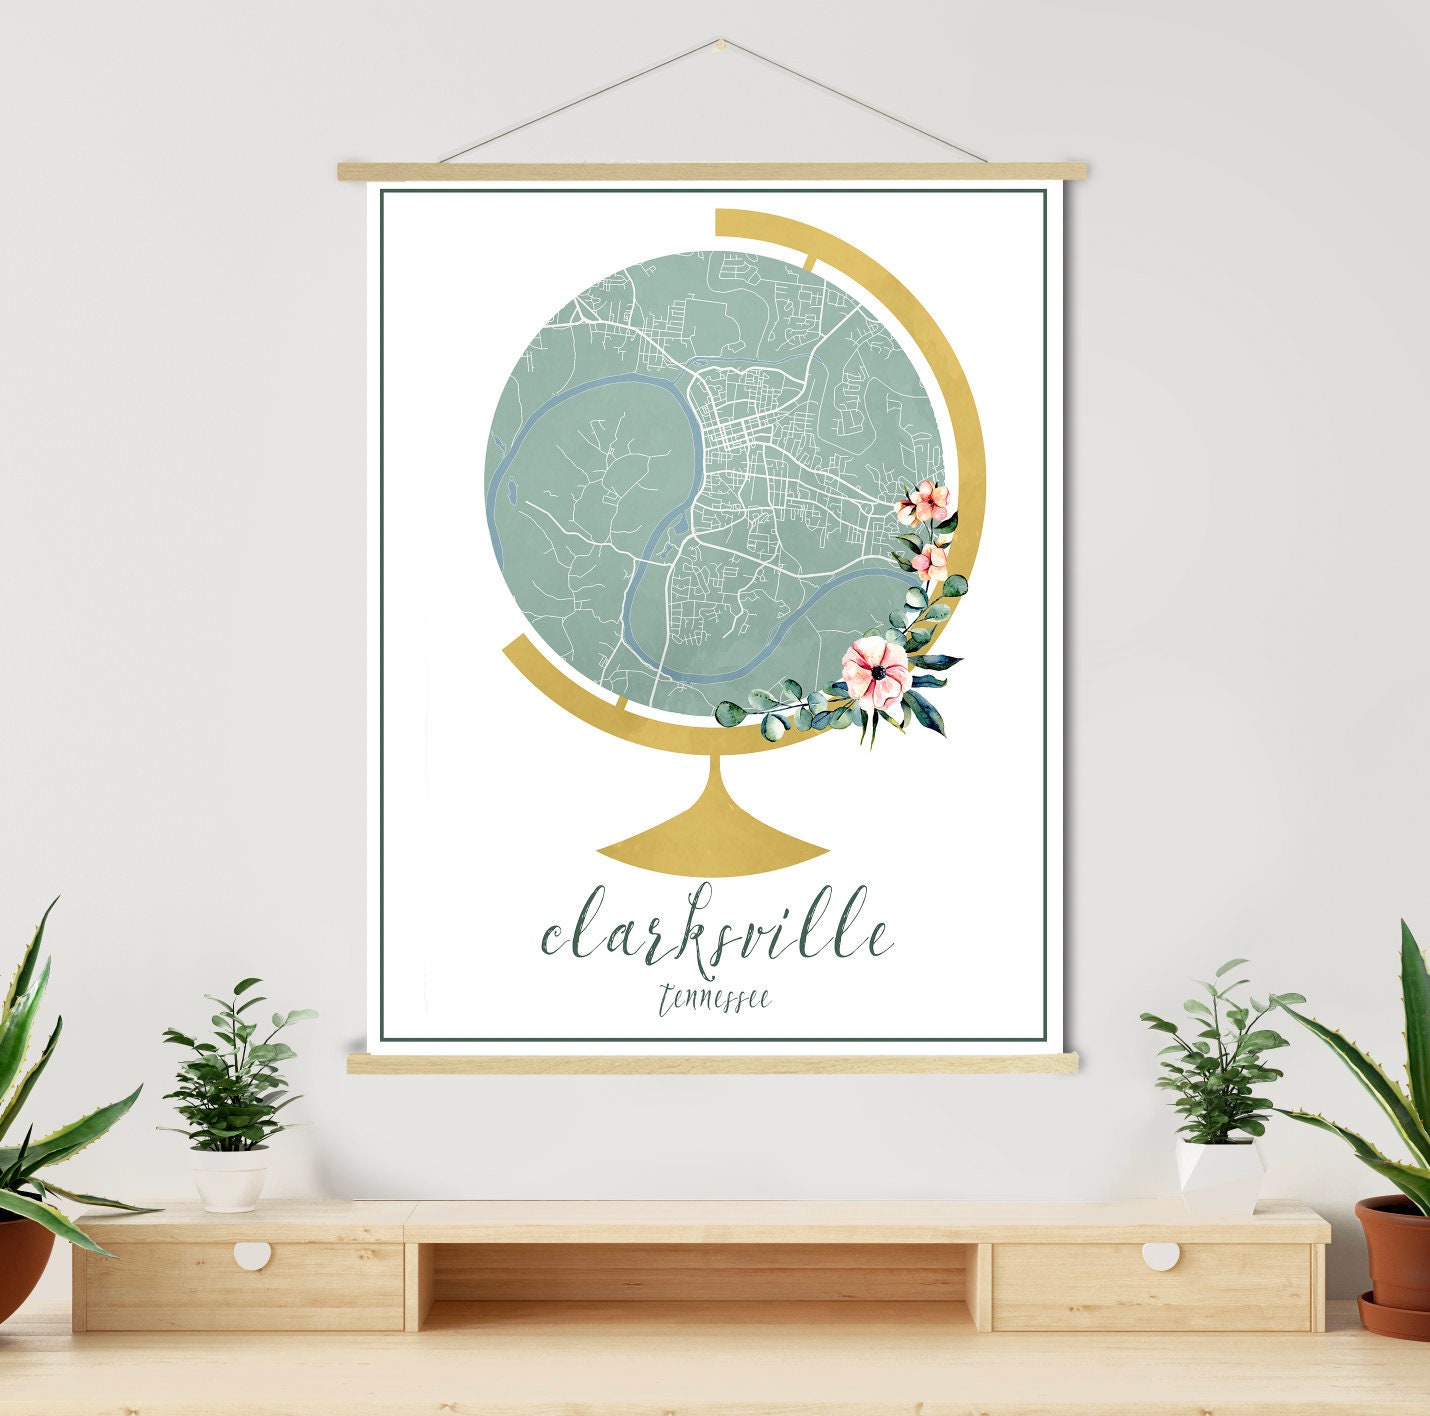 Clarksville Tennessee Globe Street Map | Hanging Canvas Of Printed Marketplace